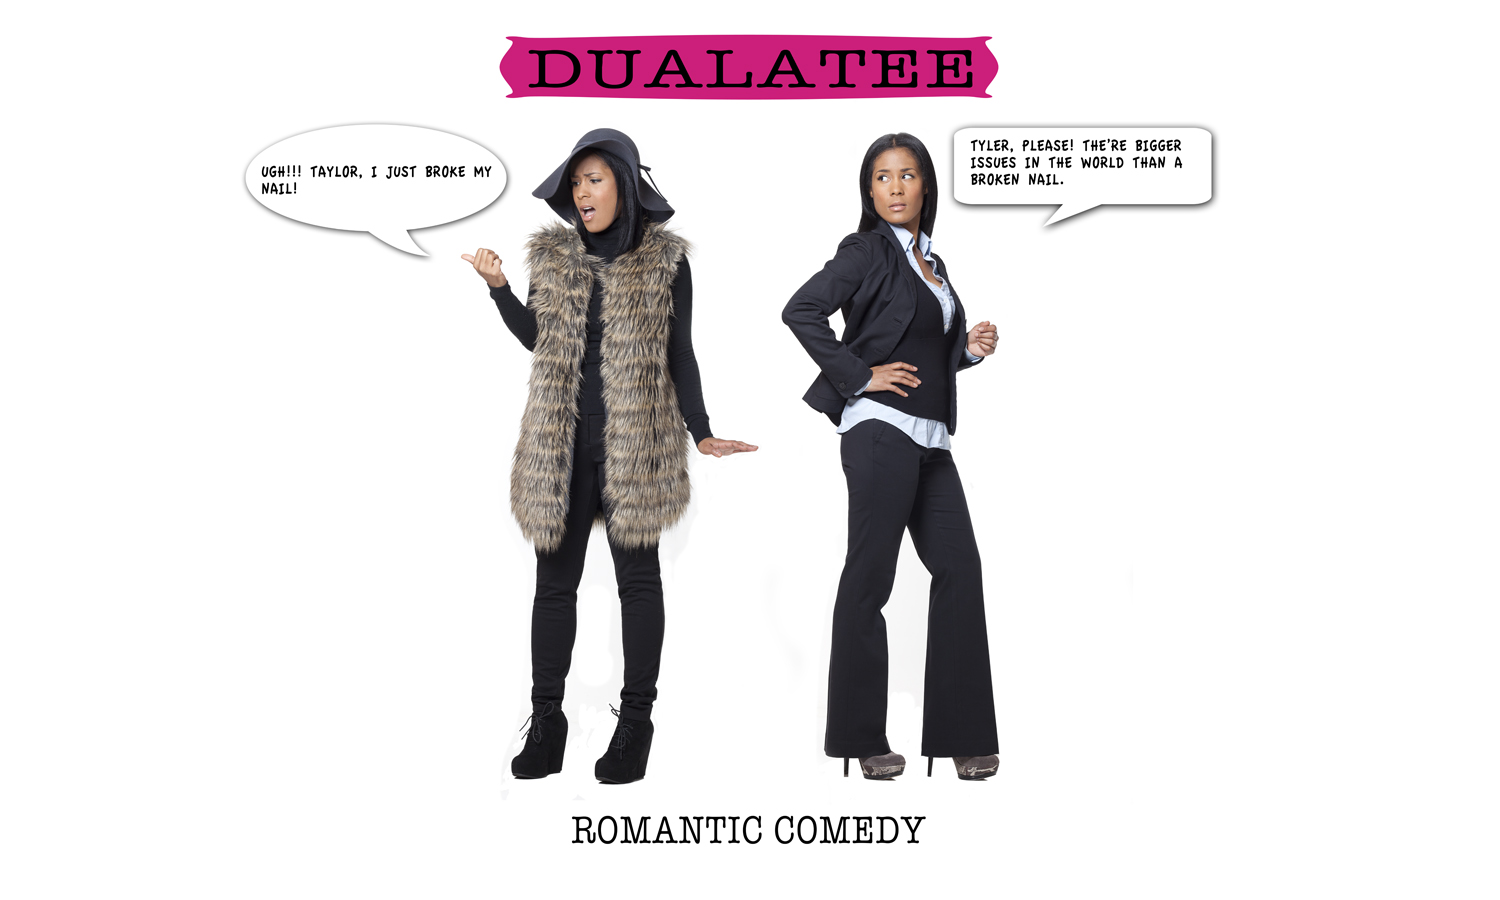 www.Dualatee.com Romantic Comedy created and written by: Teneale Anderson Bender Advertisment concept by: Teneale Bender COMING SOON!